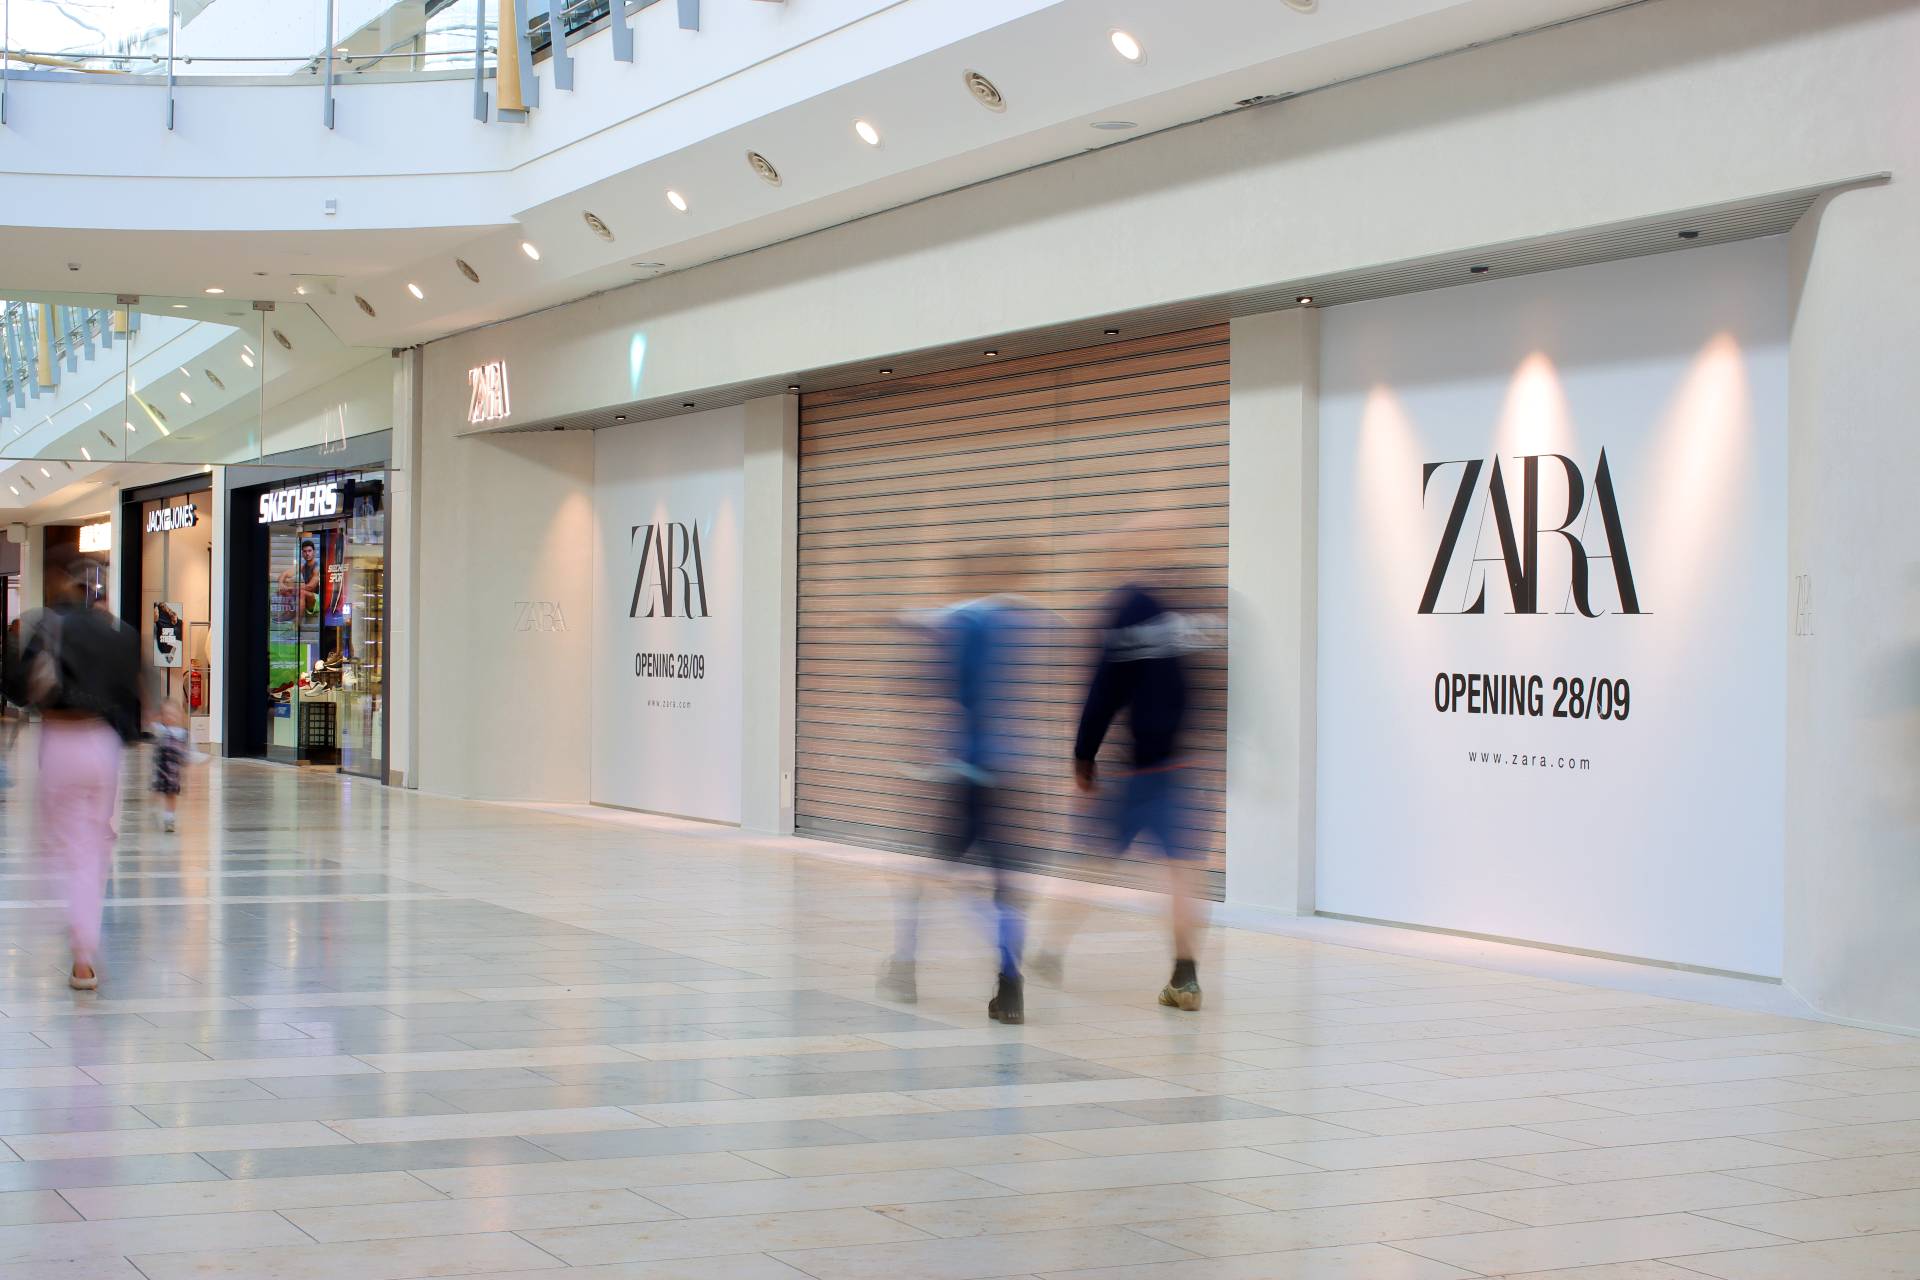 Exterior of new Zara store with boarded up windows.